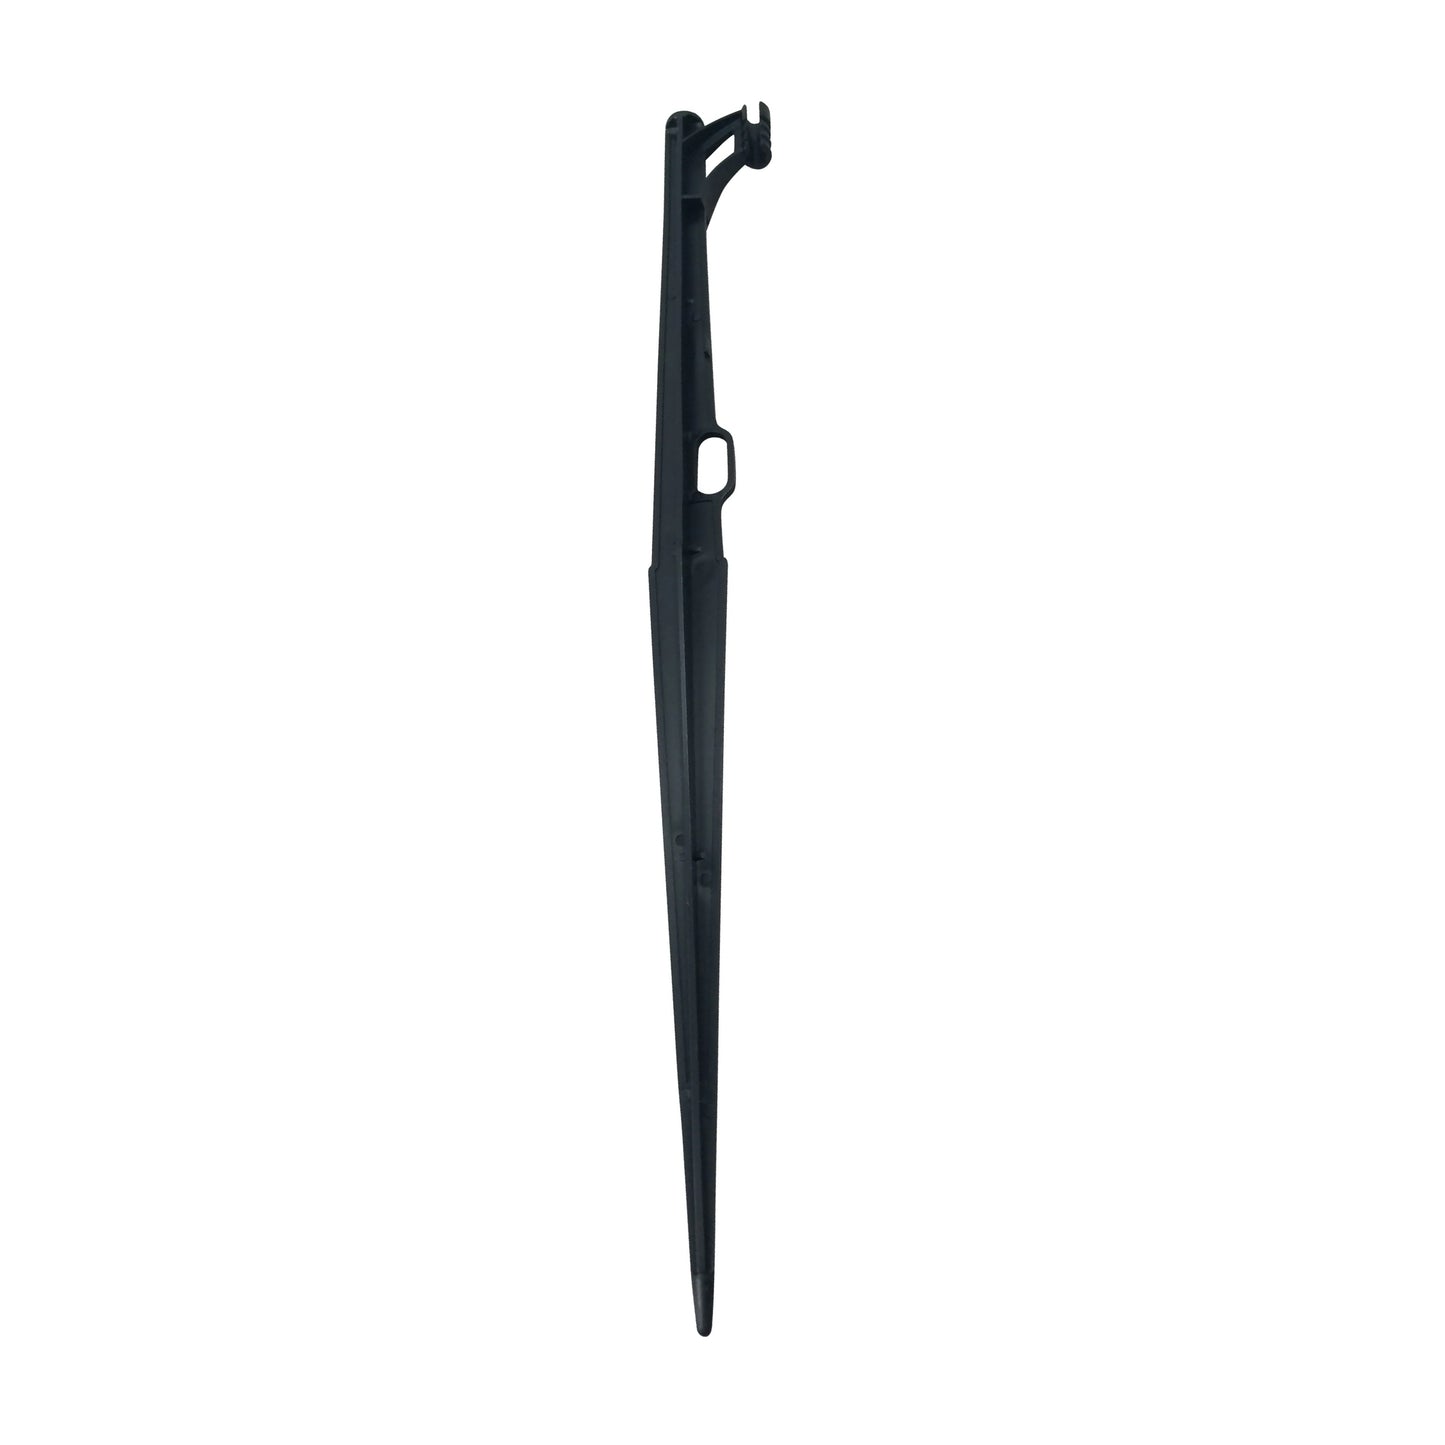 NDS S 17 - 17" Plastic Stake for Drip Tubing Jets and Micro Sprays